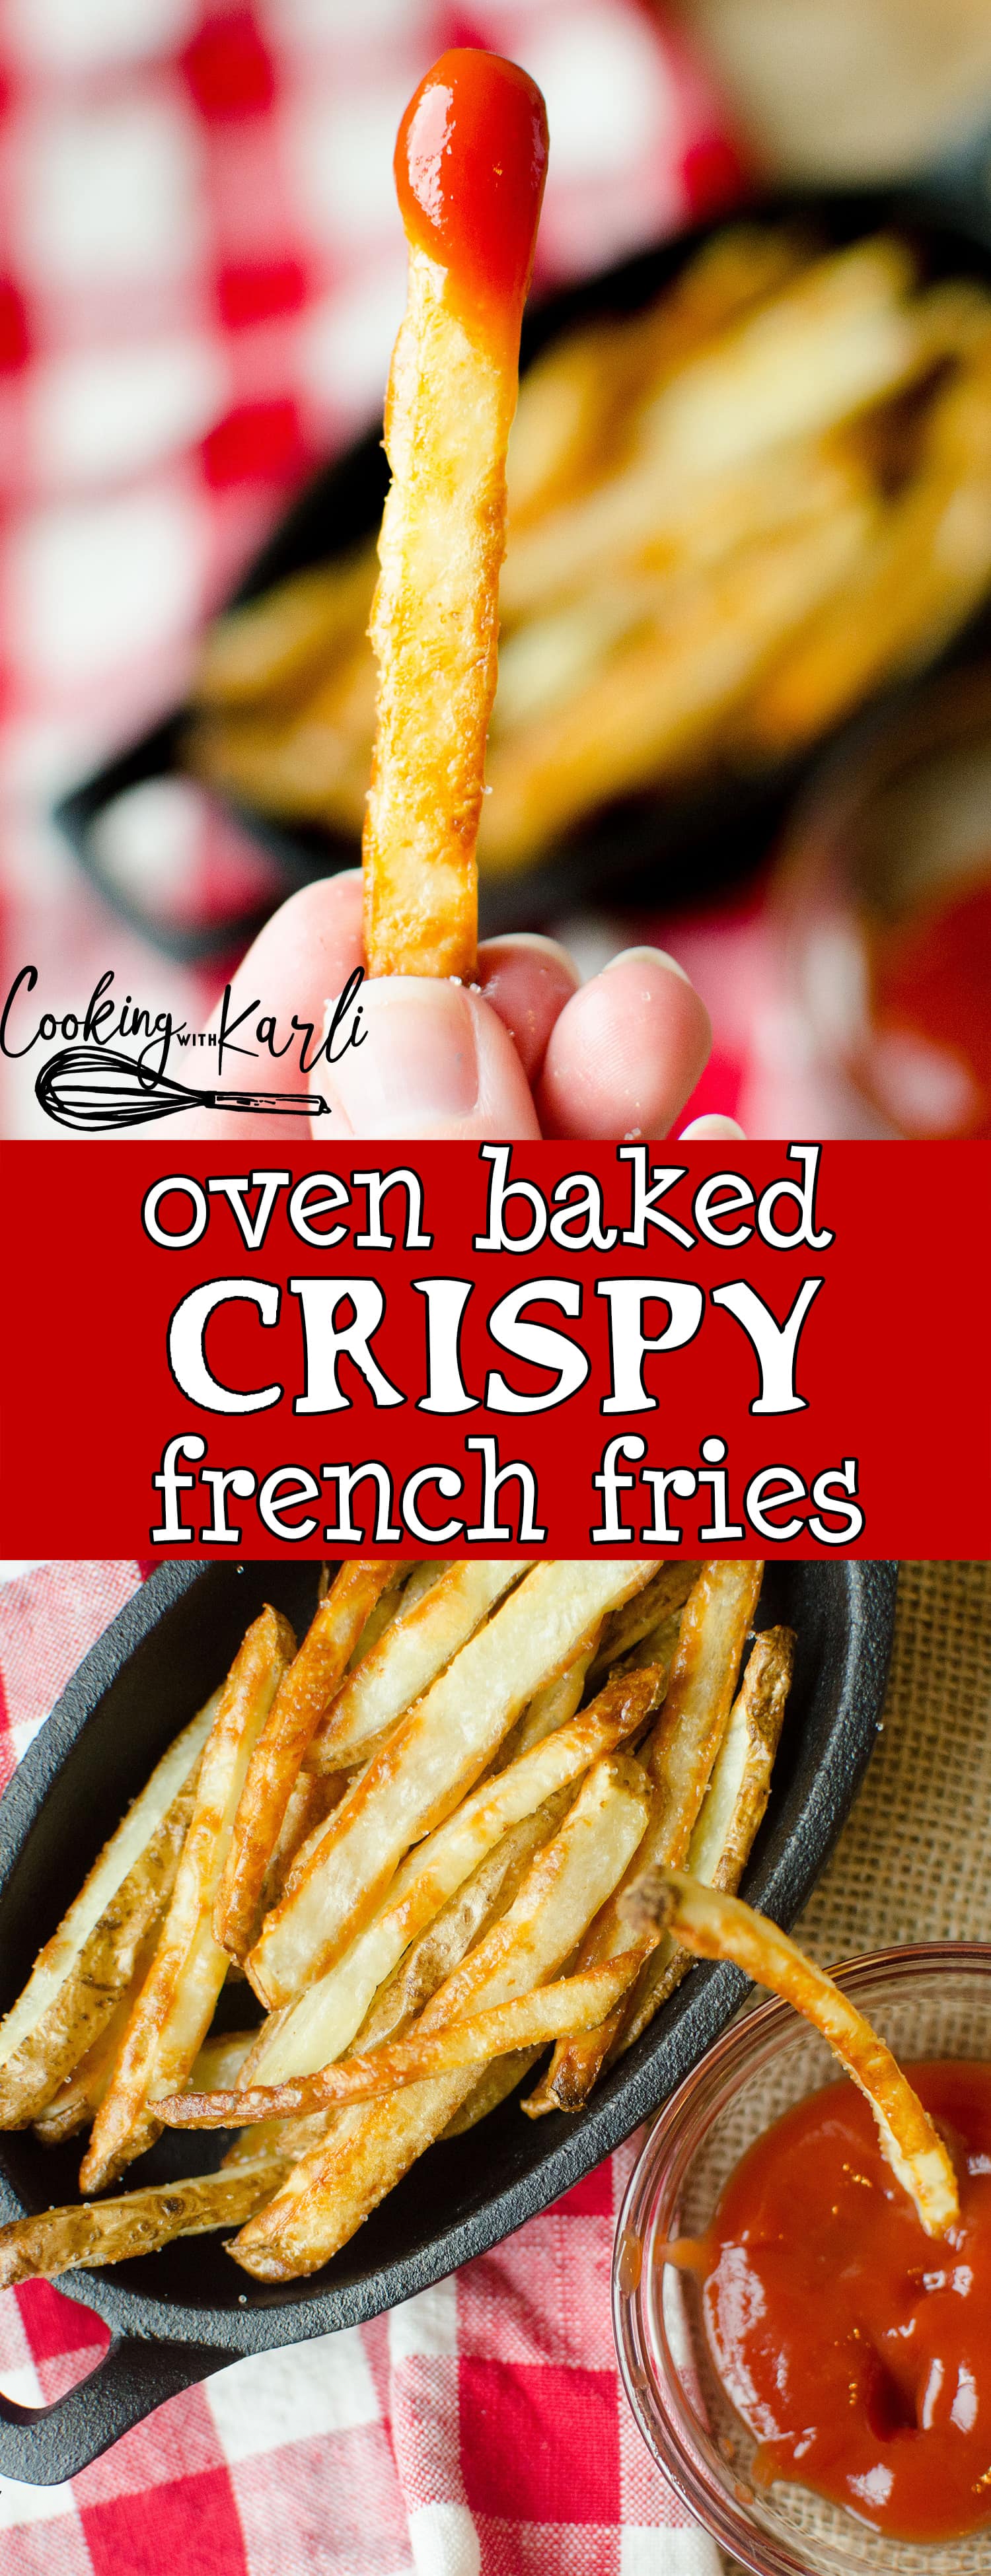 Oven Baked French Fries are fluffy on the inside and crispy on the outside! Soaking the potato slices in water and then baking them at two temperatures are the tricks that will make these french fries the best you've ever tasted! -Cooking with Karli- #frenchfries #fries #crispy #oven #baked